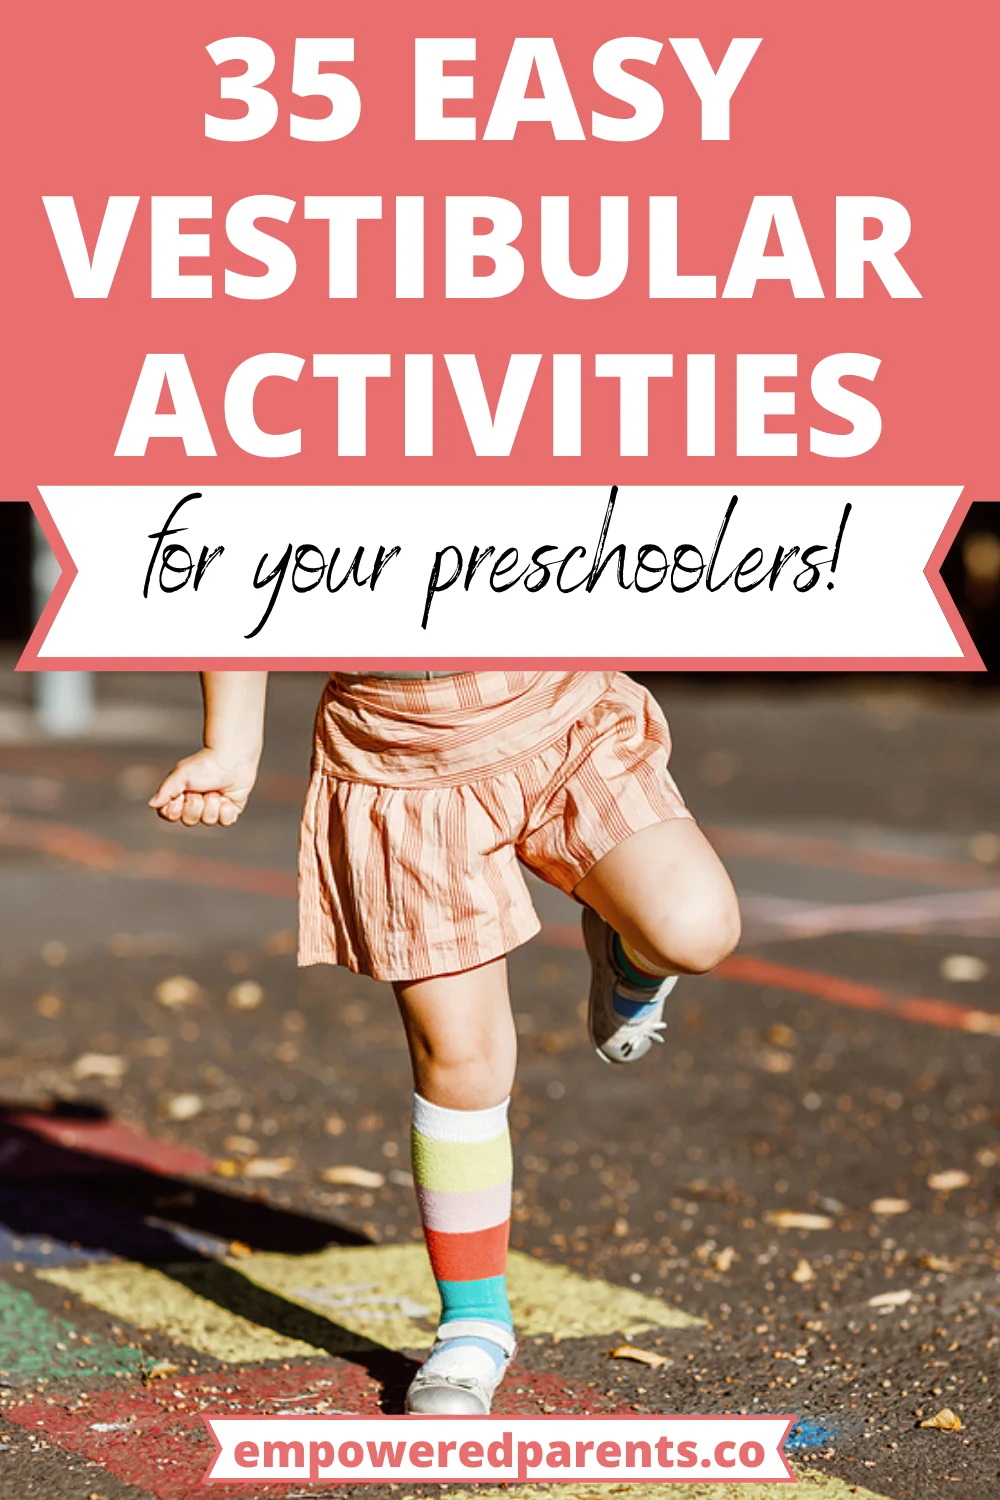 Child jumping on a hopscotch court. Text reads "35 easy vestibular activities for your preschoolers".